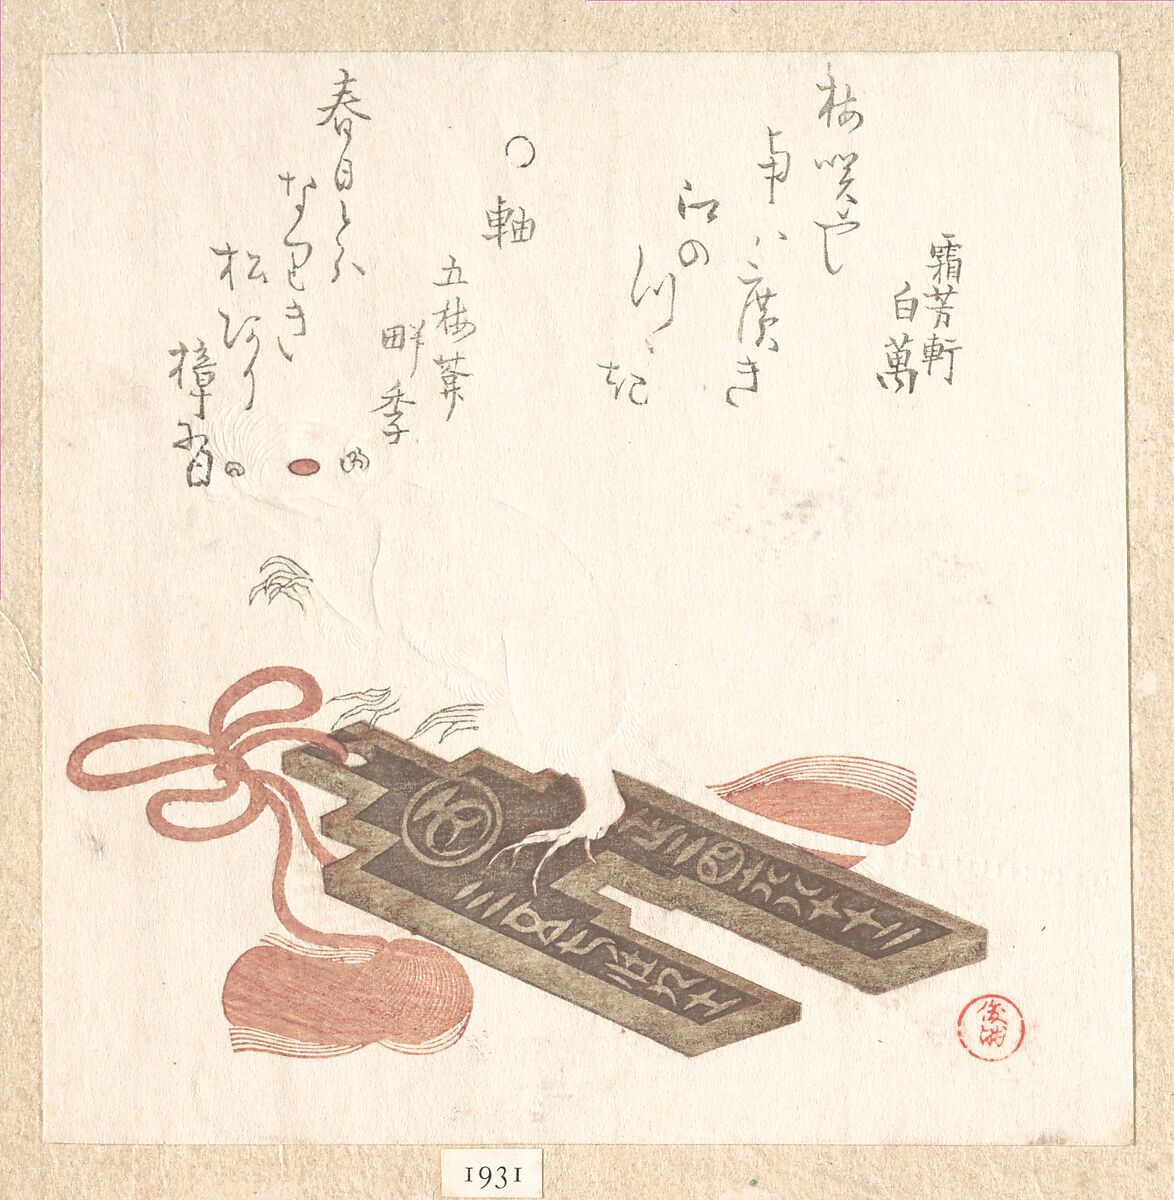 Rat on a Fūchin, Ornament with a Design of Egoyomi (Pictorial Calendar), Kubo Shunman (Japanese, 1757–1820), Woodblock print (surimono); ink and color on paper, Japan 